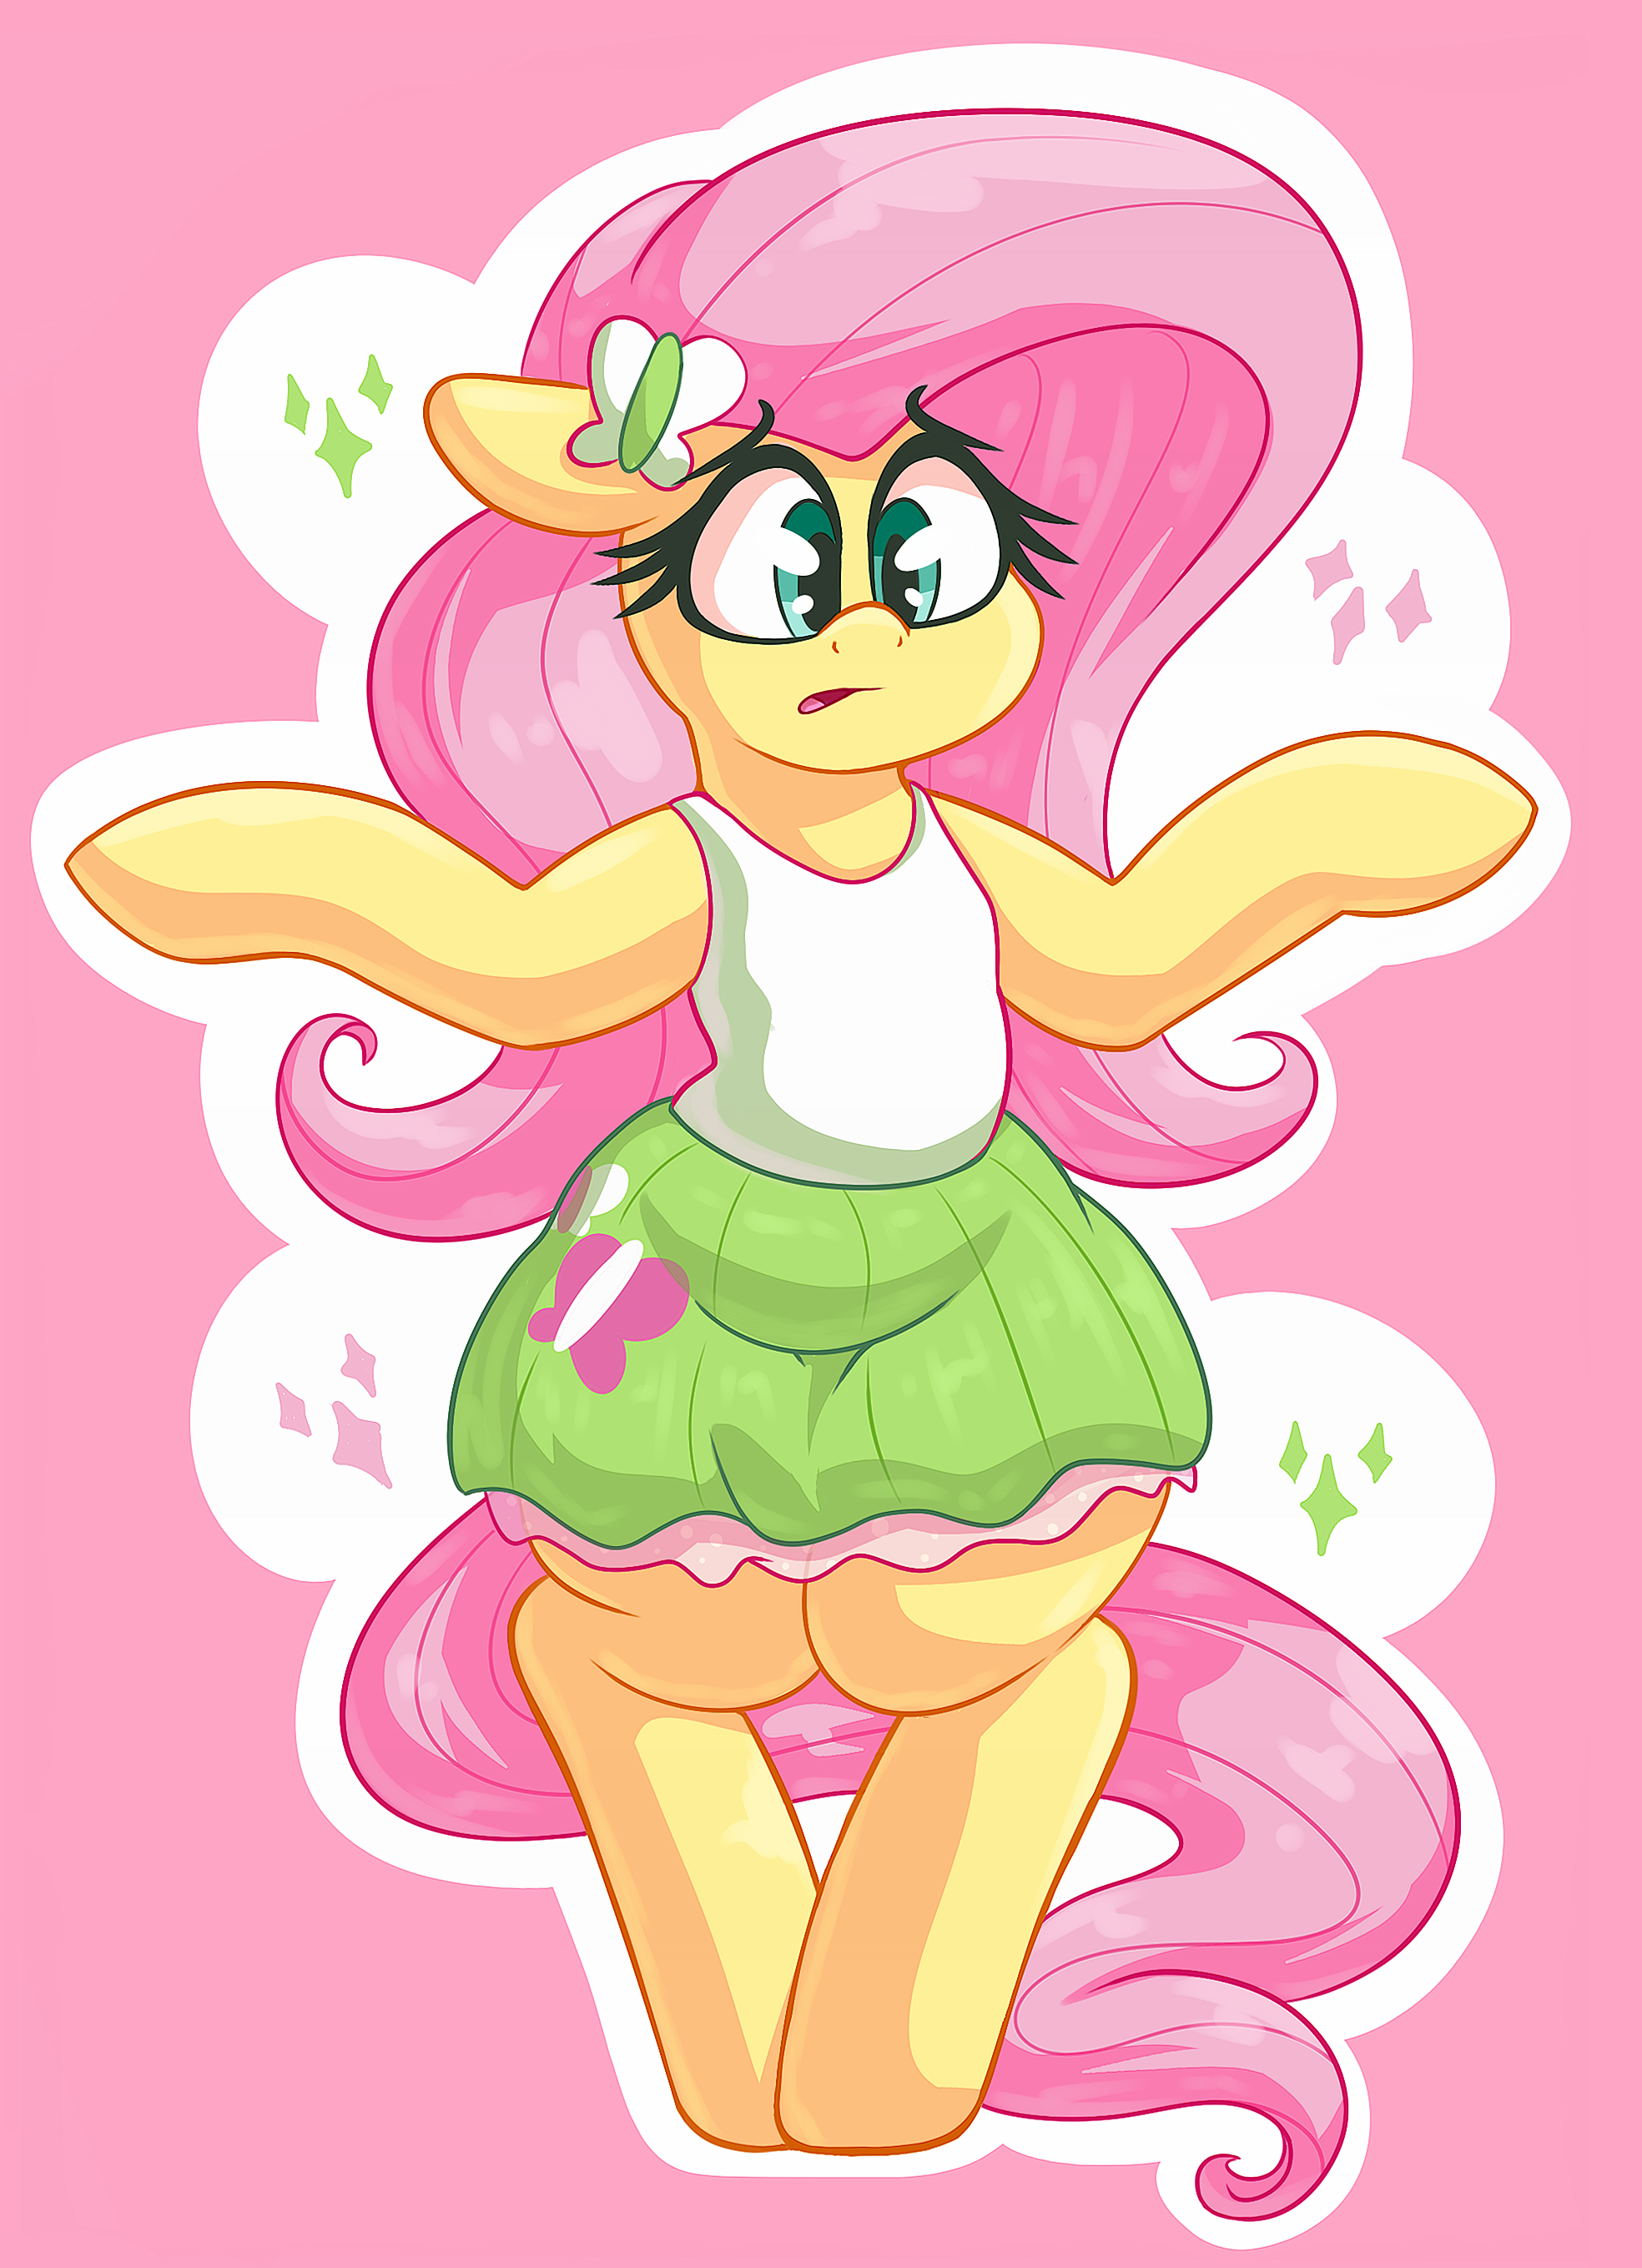 flutters_eqg_by_graphenedraws-dco3tk2.pn